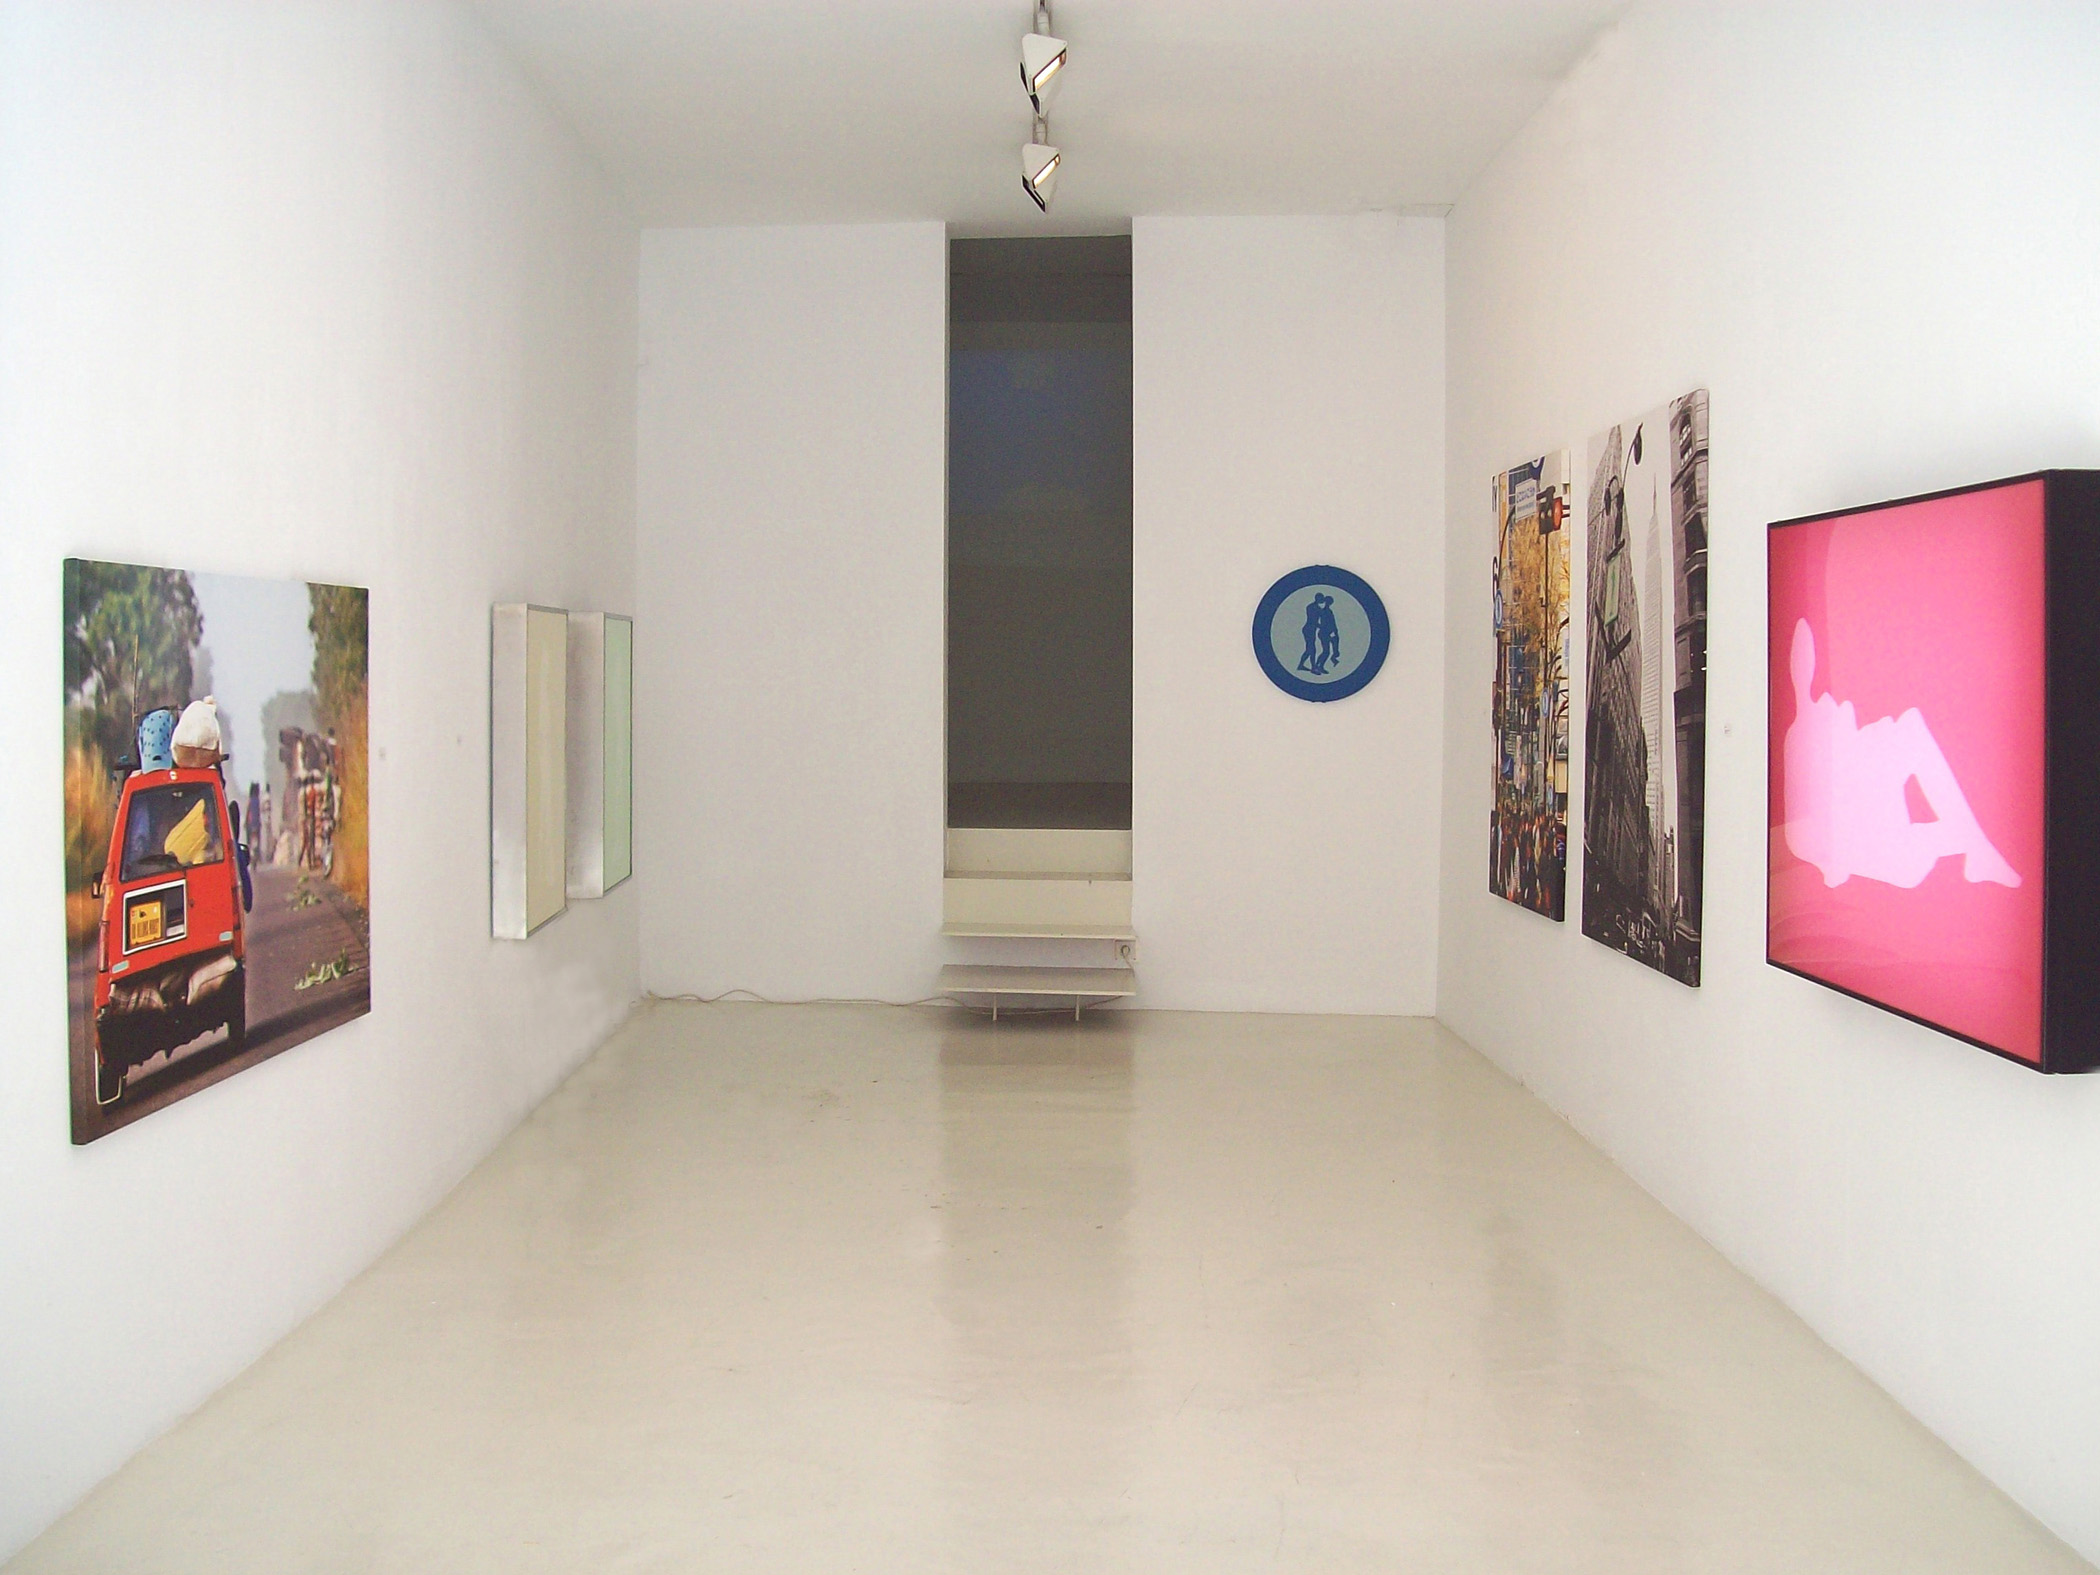 Exhibition view in the Galería Maior of Palma, 2011